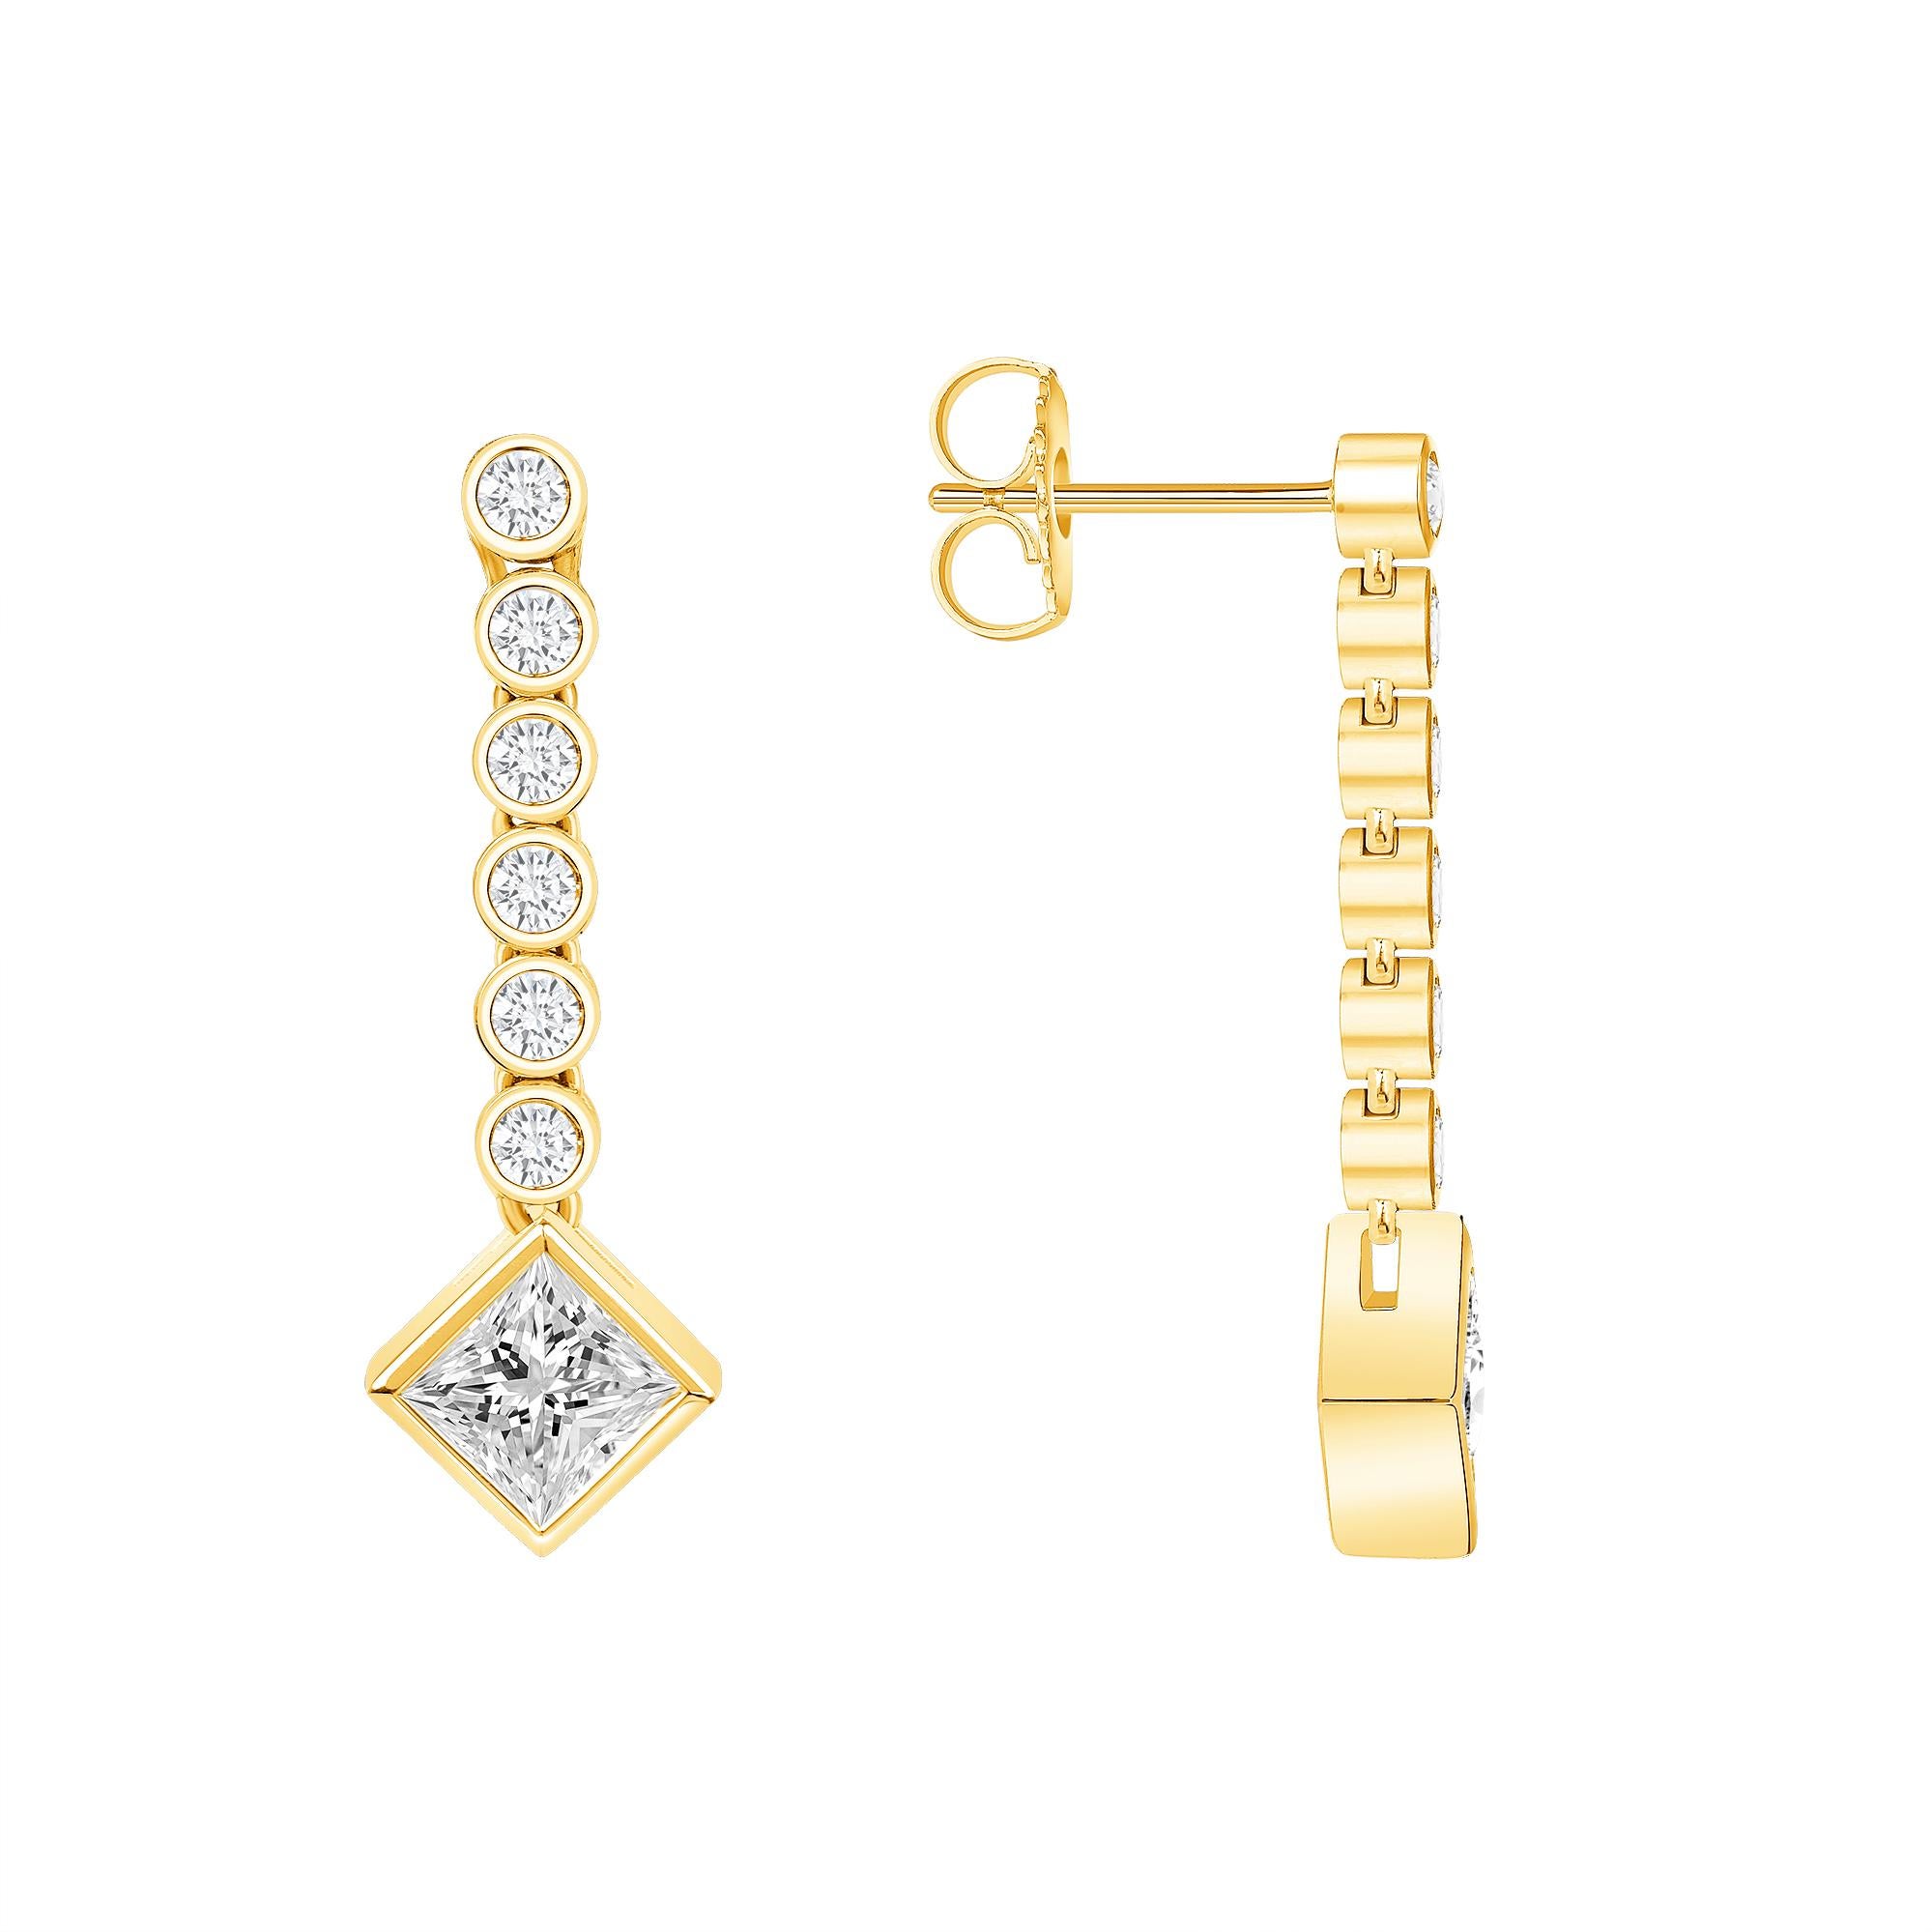 18K Yellow Gold Princess Drop Earring, Dangling Earring, Dainty Bridal Jewelry,  Square Gold Earrings, Diamond Dangle Earrings, Real Diamond Earrings

This is a beautiful princess cut design drop earrings. It is set in real solid 18Kt Gold. You can